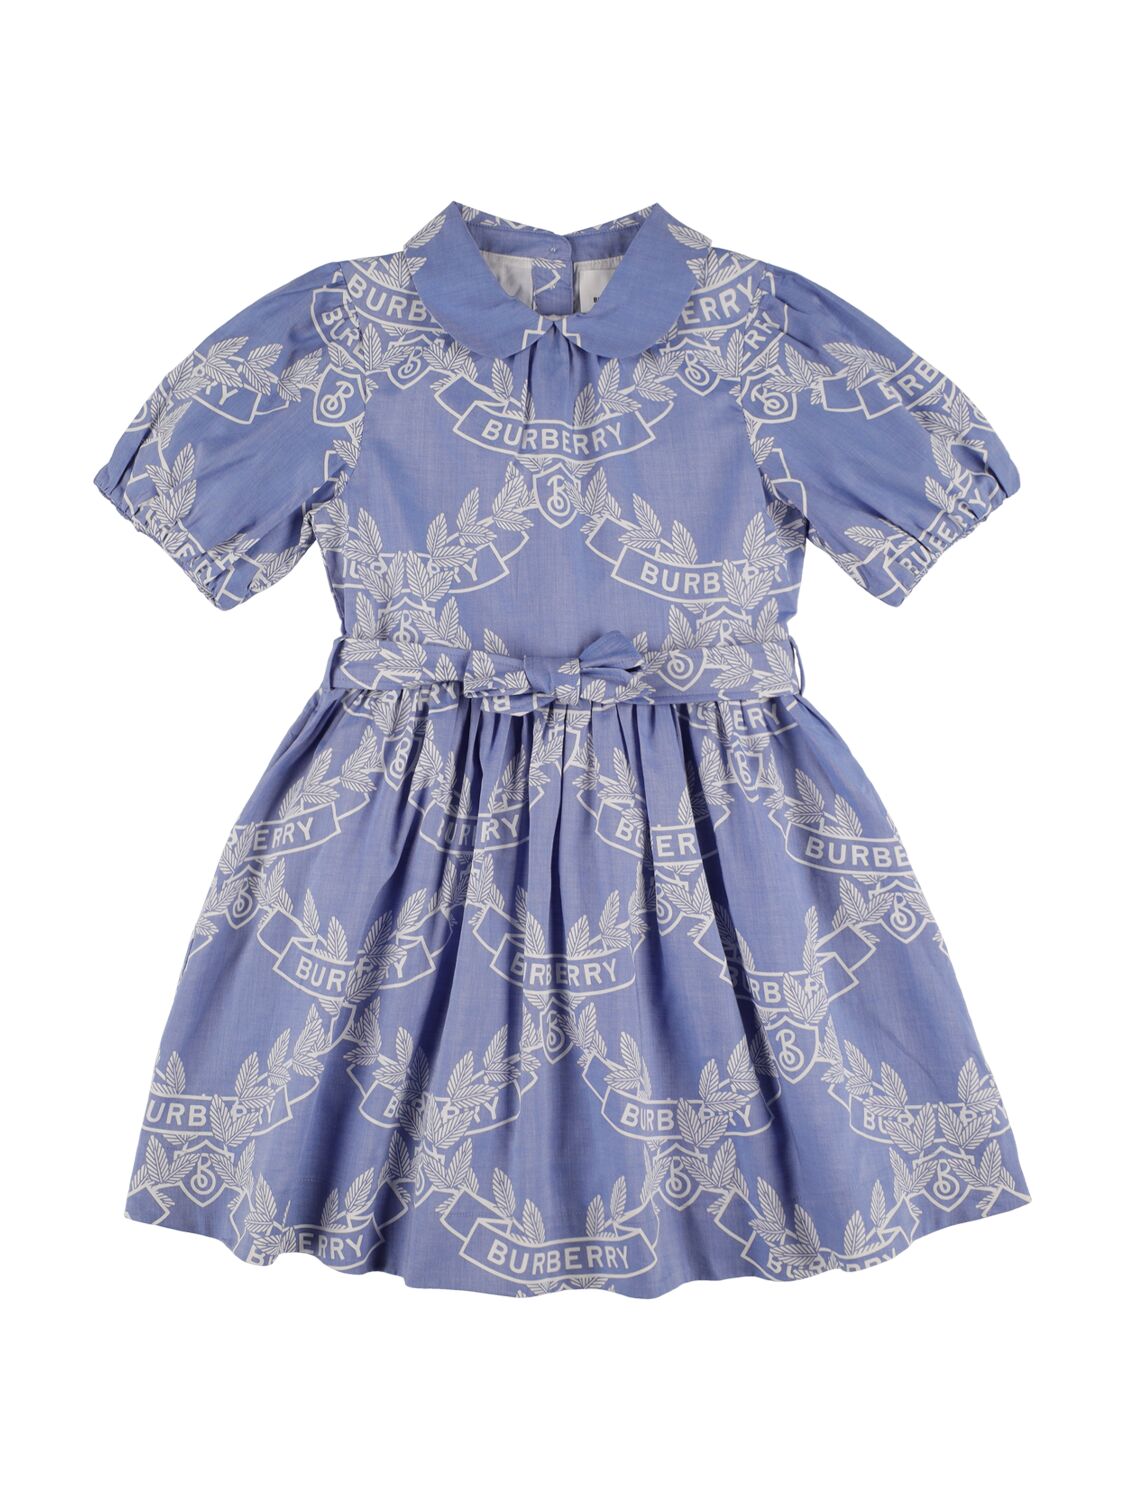 Burberry Kids' Printed Cotton Dress W/ Puff Sleeves In Light Blue